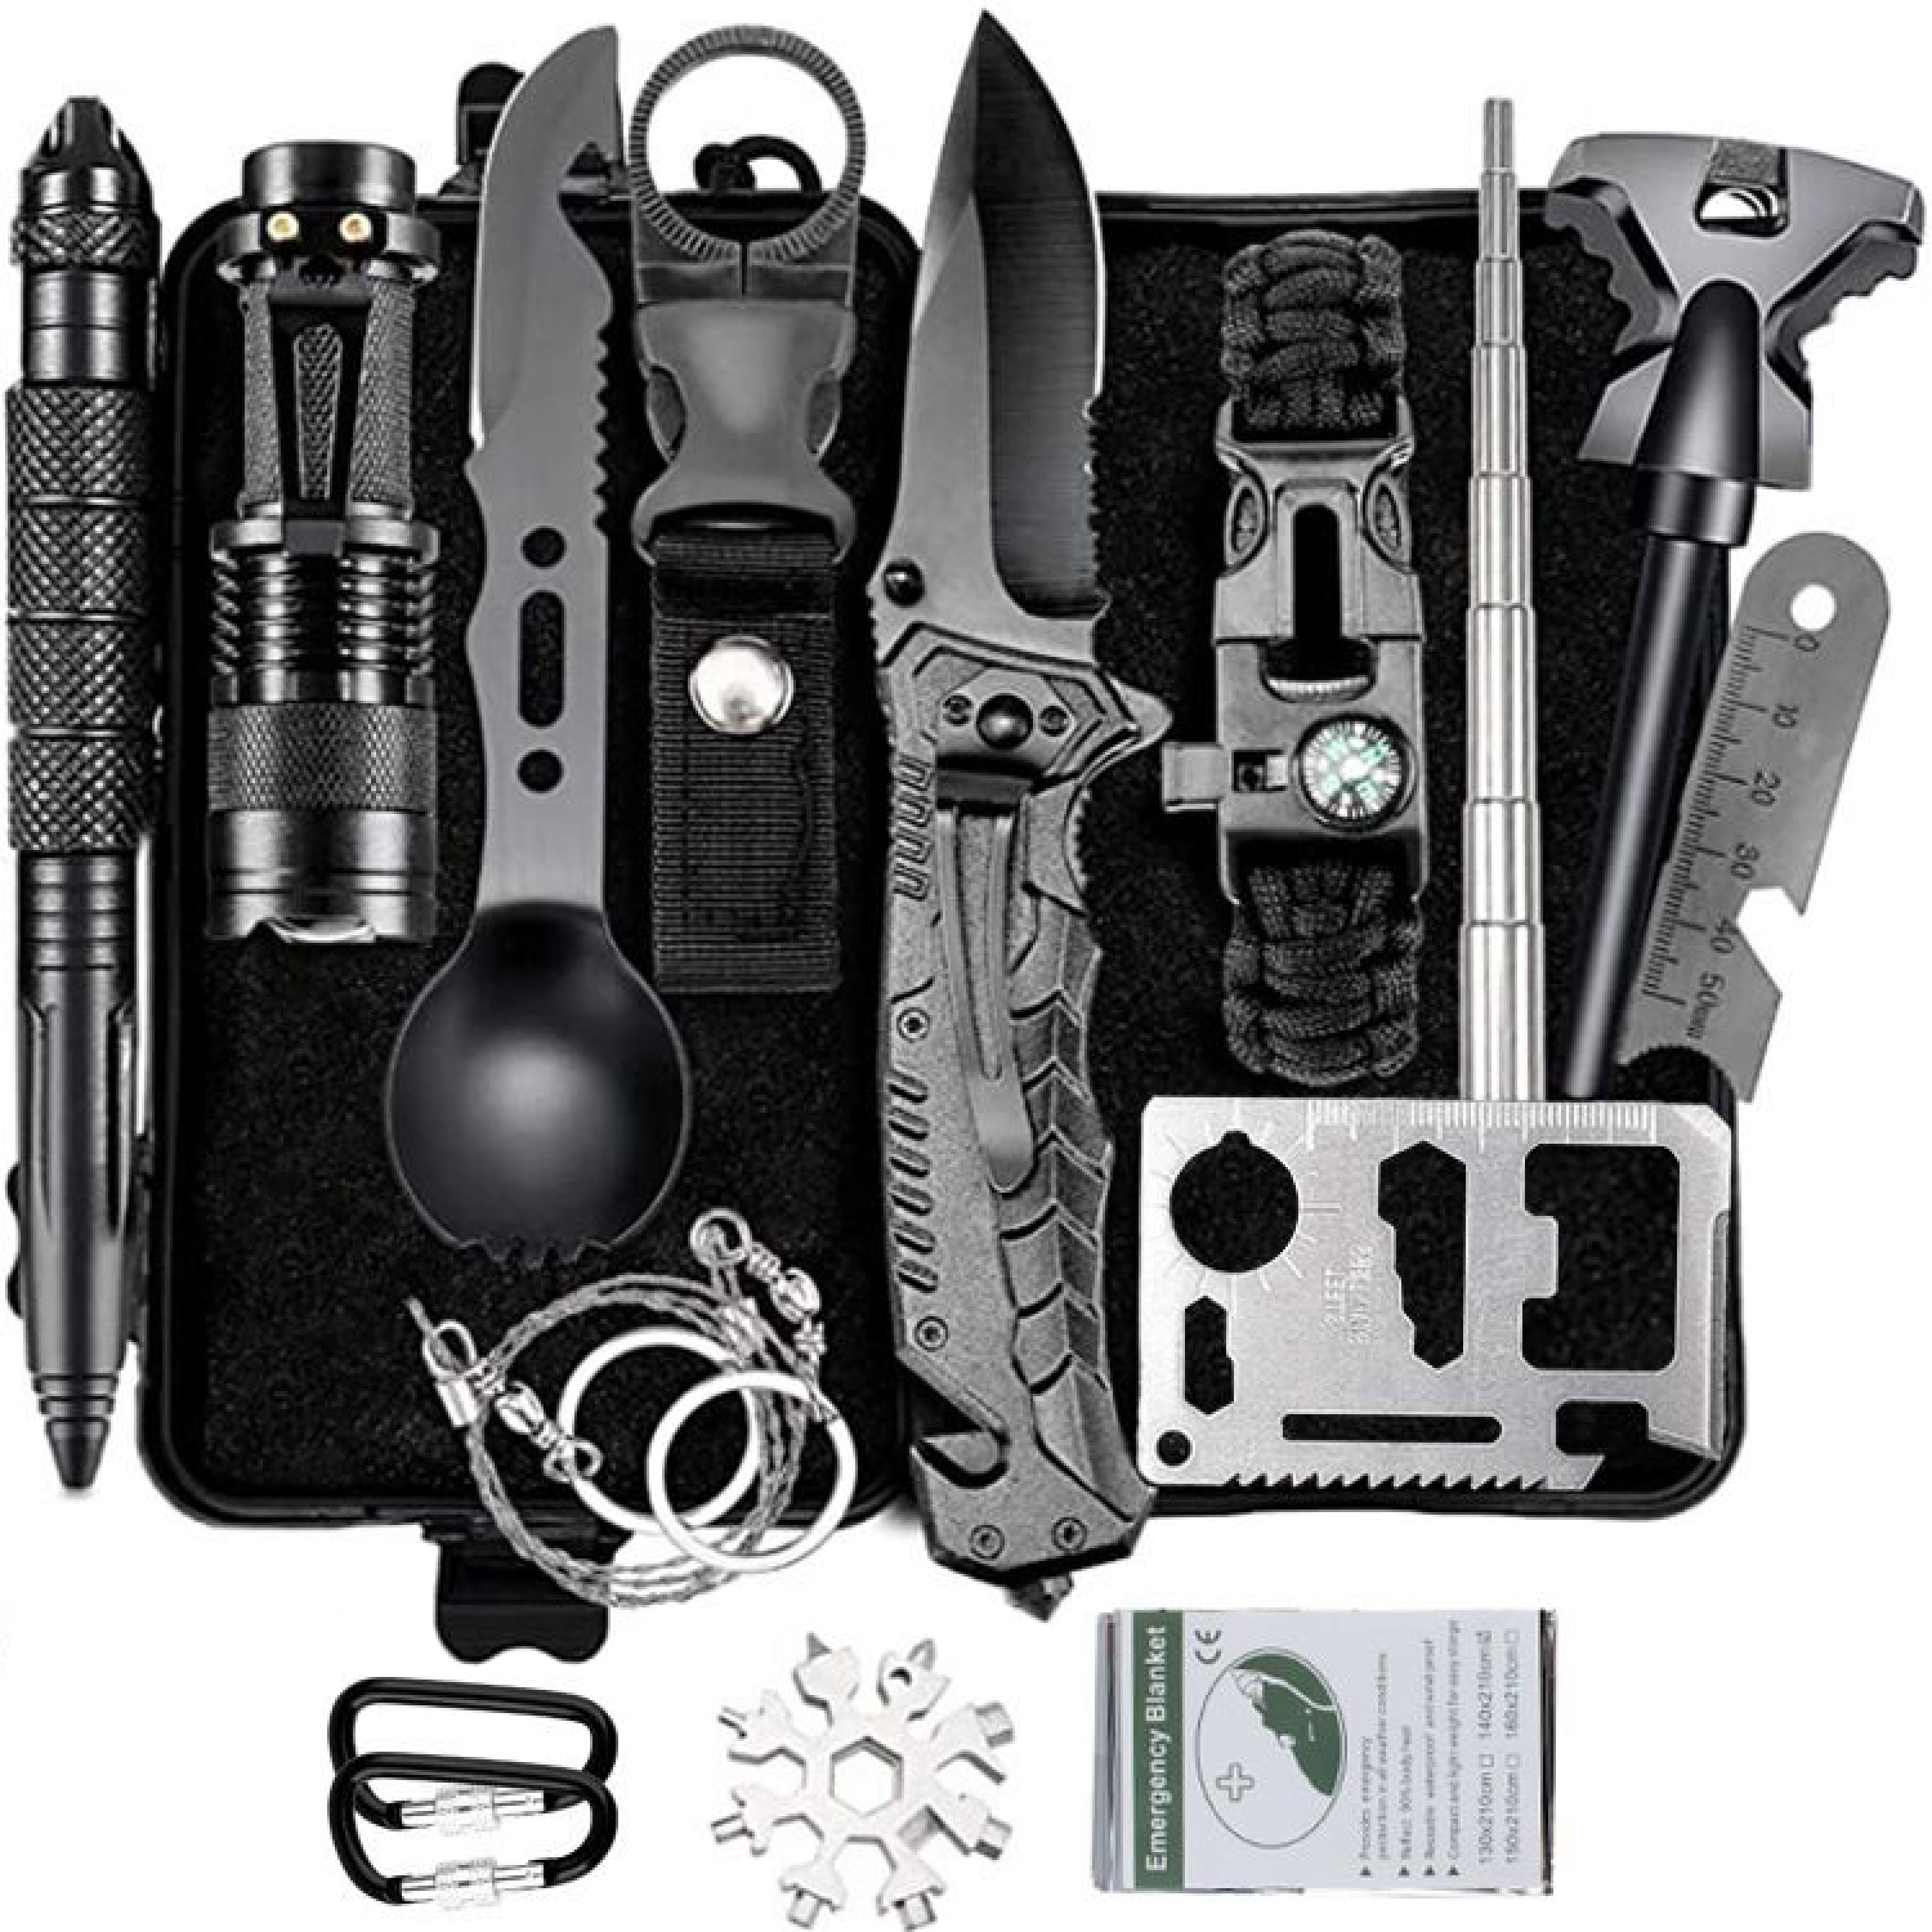 Details about   18PCS Outdoor Camping Survival Gear Kit Military Tactical EDC Emergency Tools 